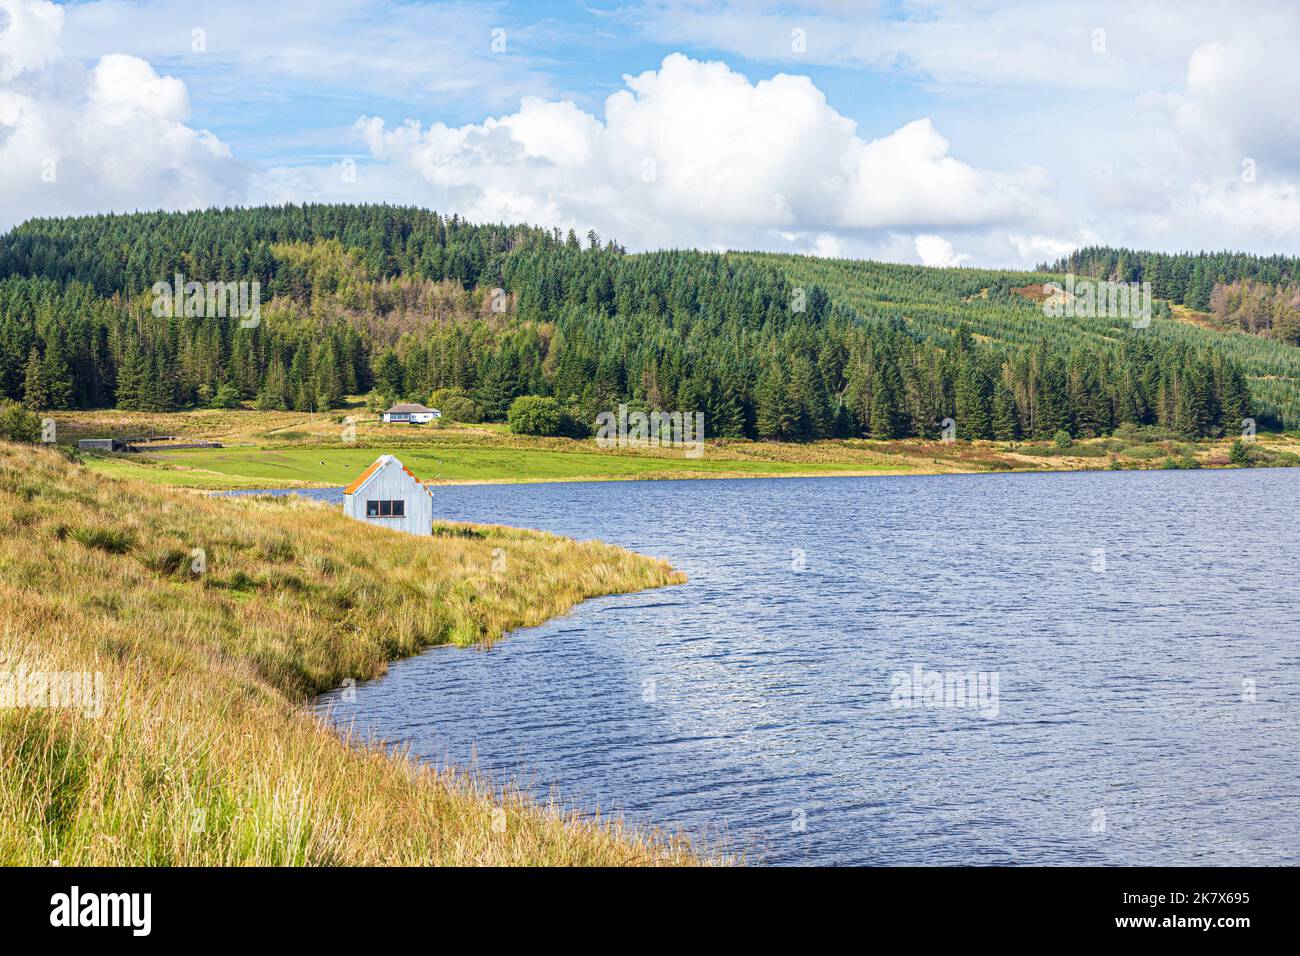 The northern end of Lussa Loch on the Kintyre Peninsula, Argyll & Bute, Scotland UK Stock Photo